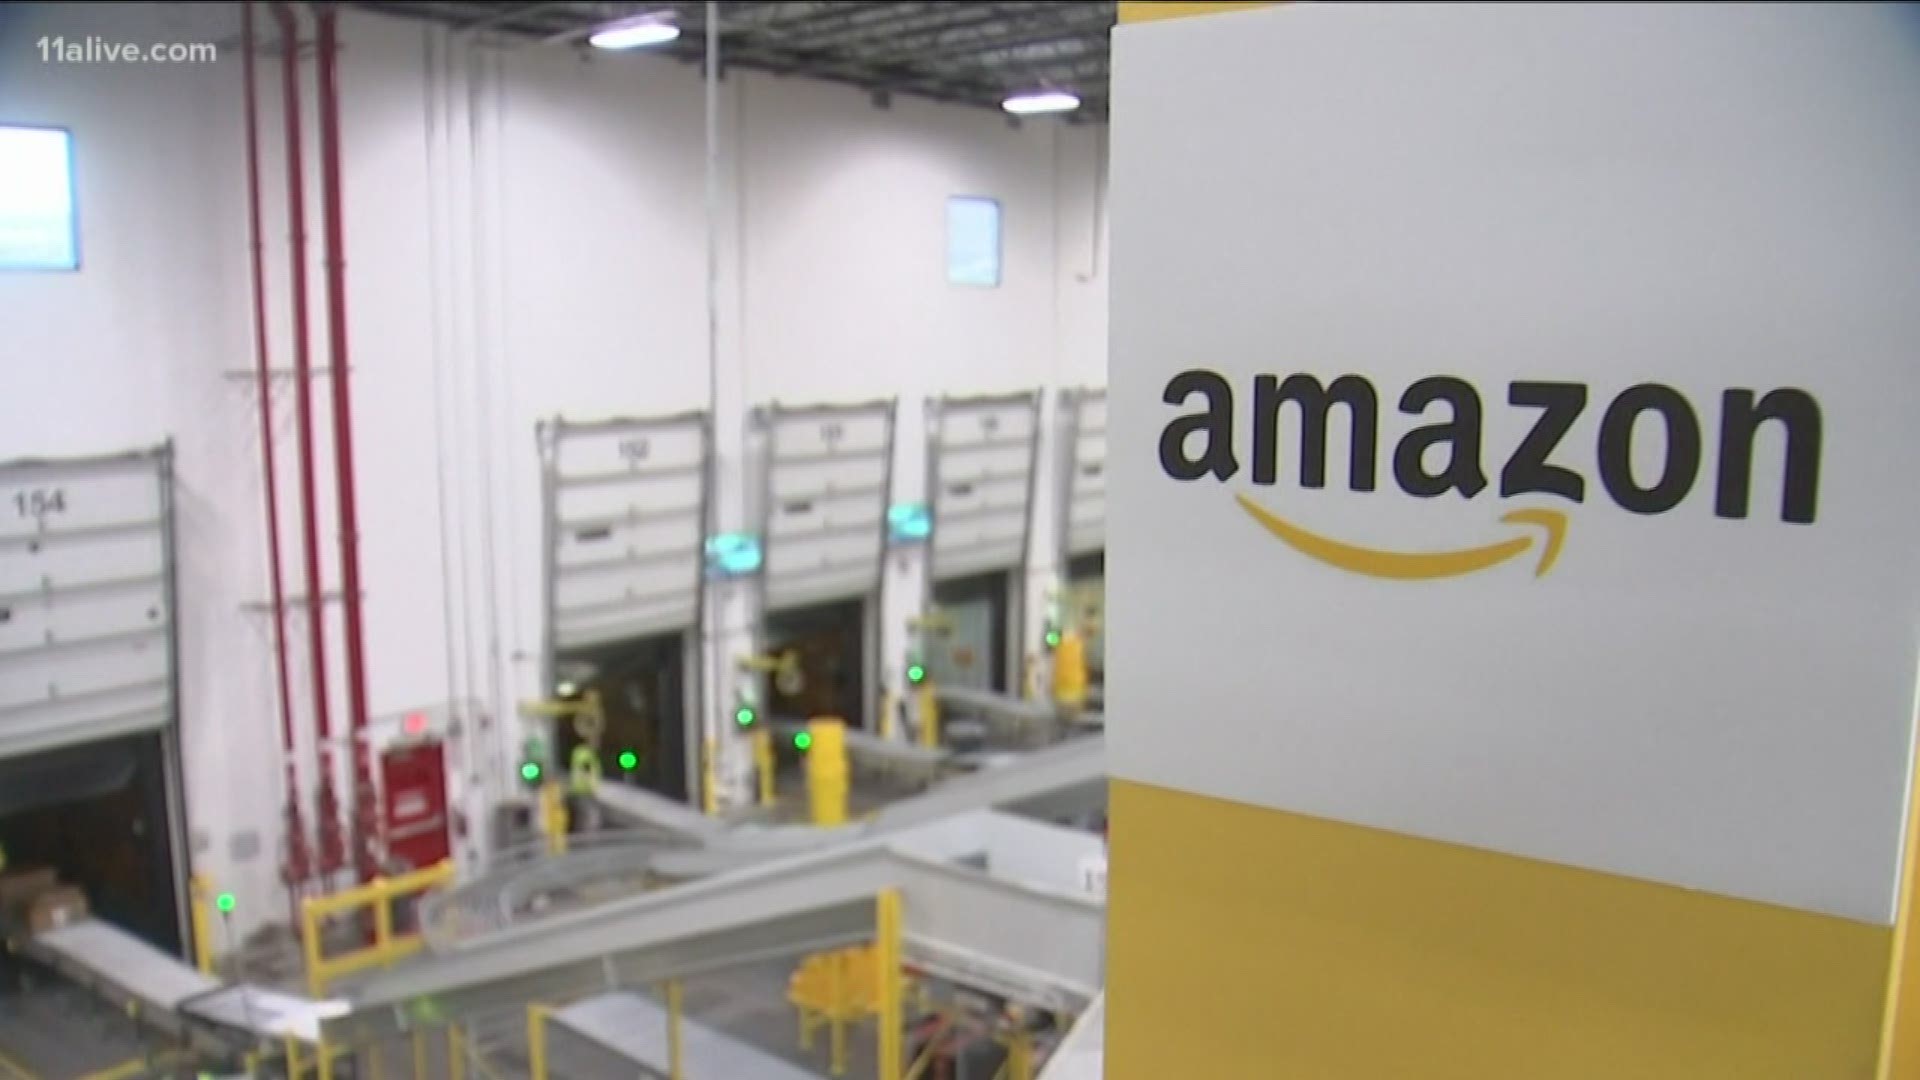 The company is opening a fulfillment center and all jobs will be full-time with benefits.